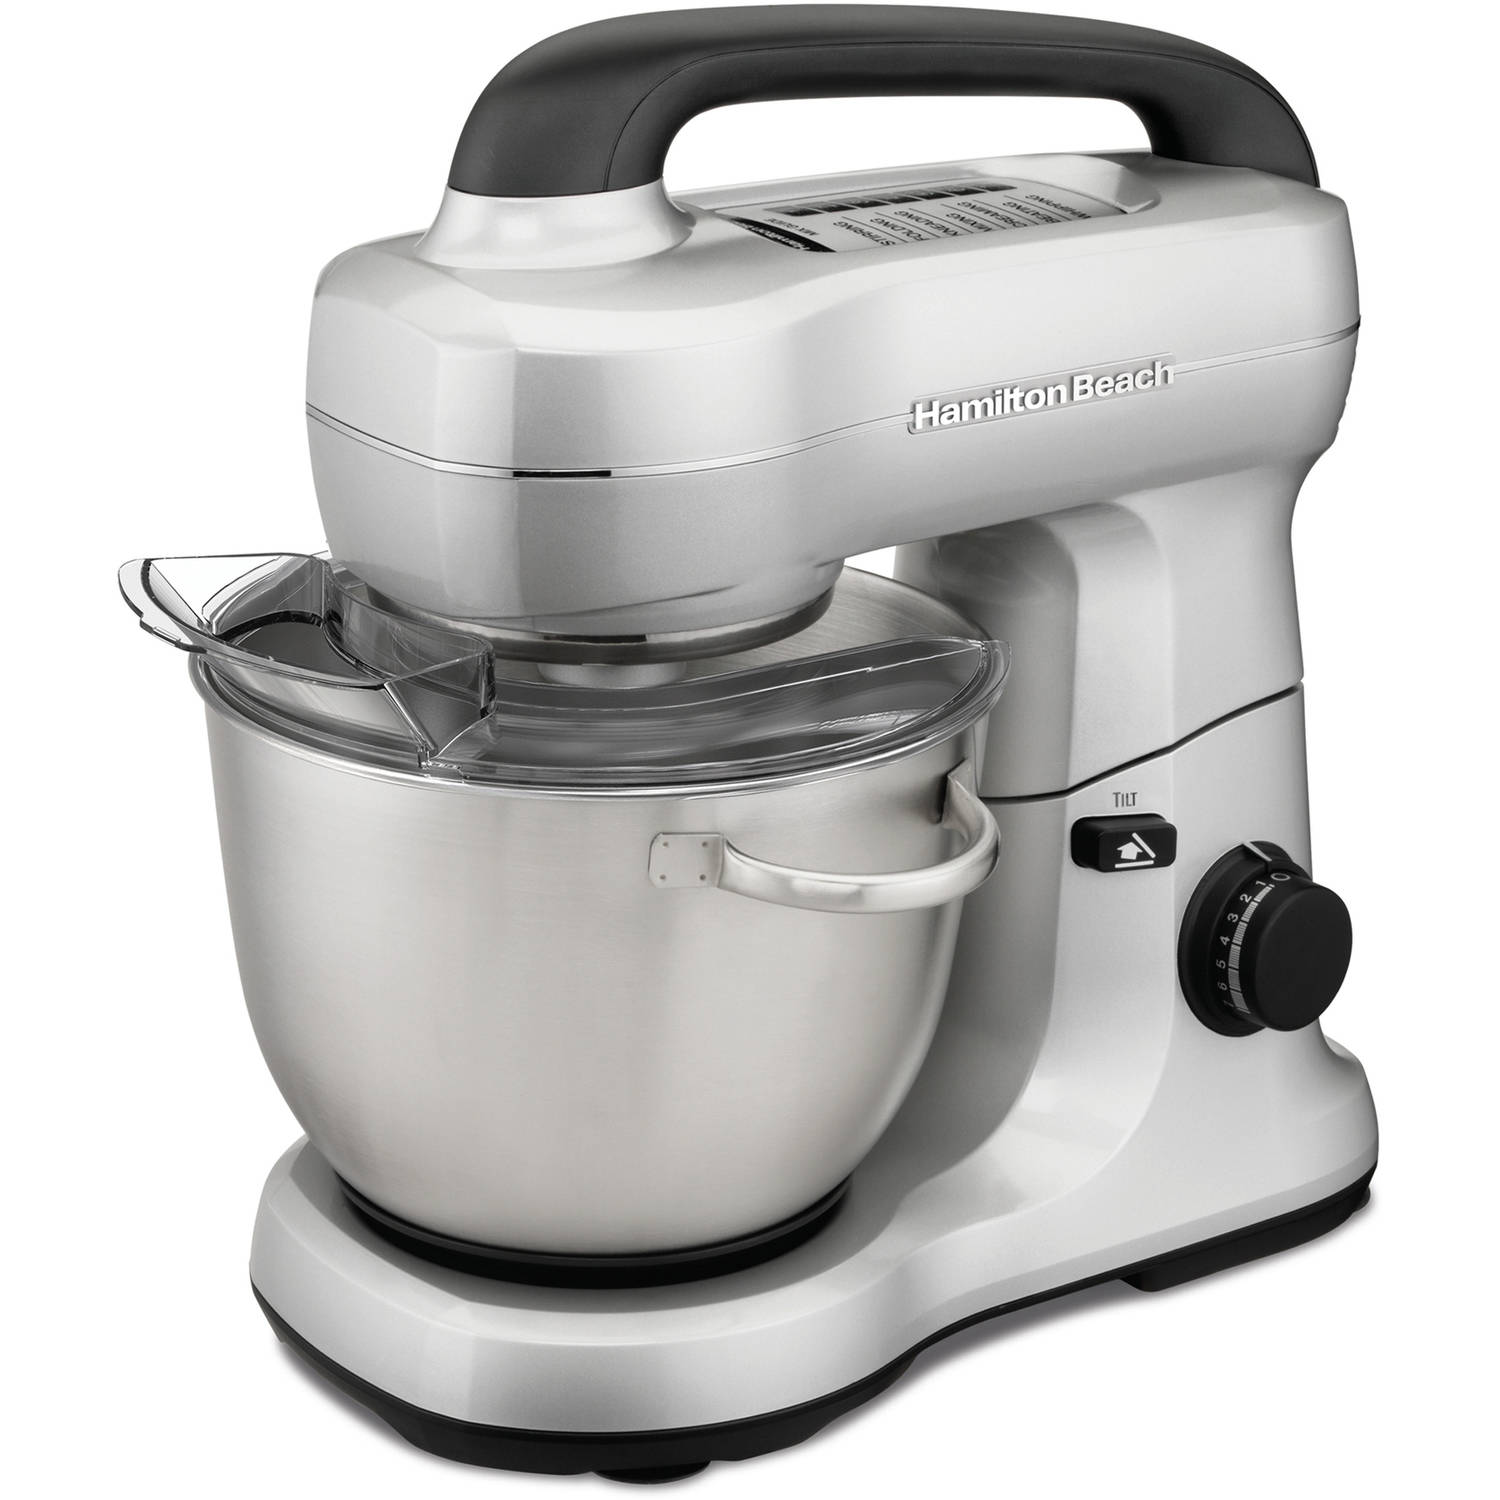 Hamilton Beach Brands Inc. Professional 7 Speed Stand Mixer with 4 Quart Mixing Bowl Attachments Counter